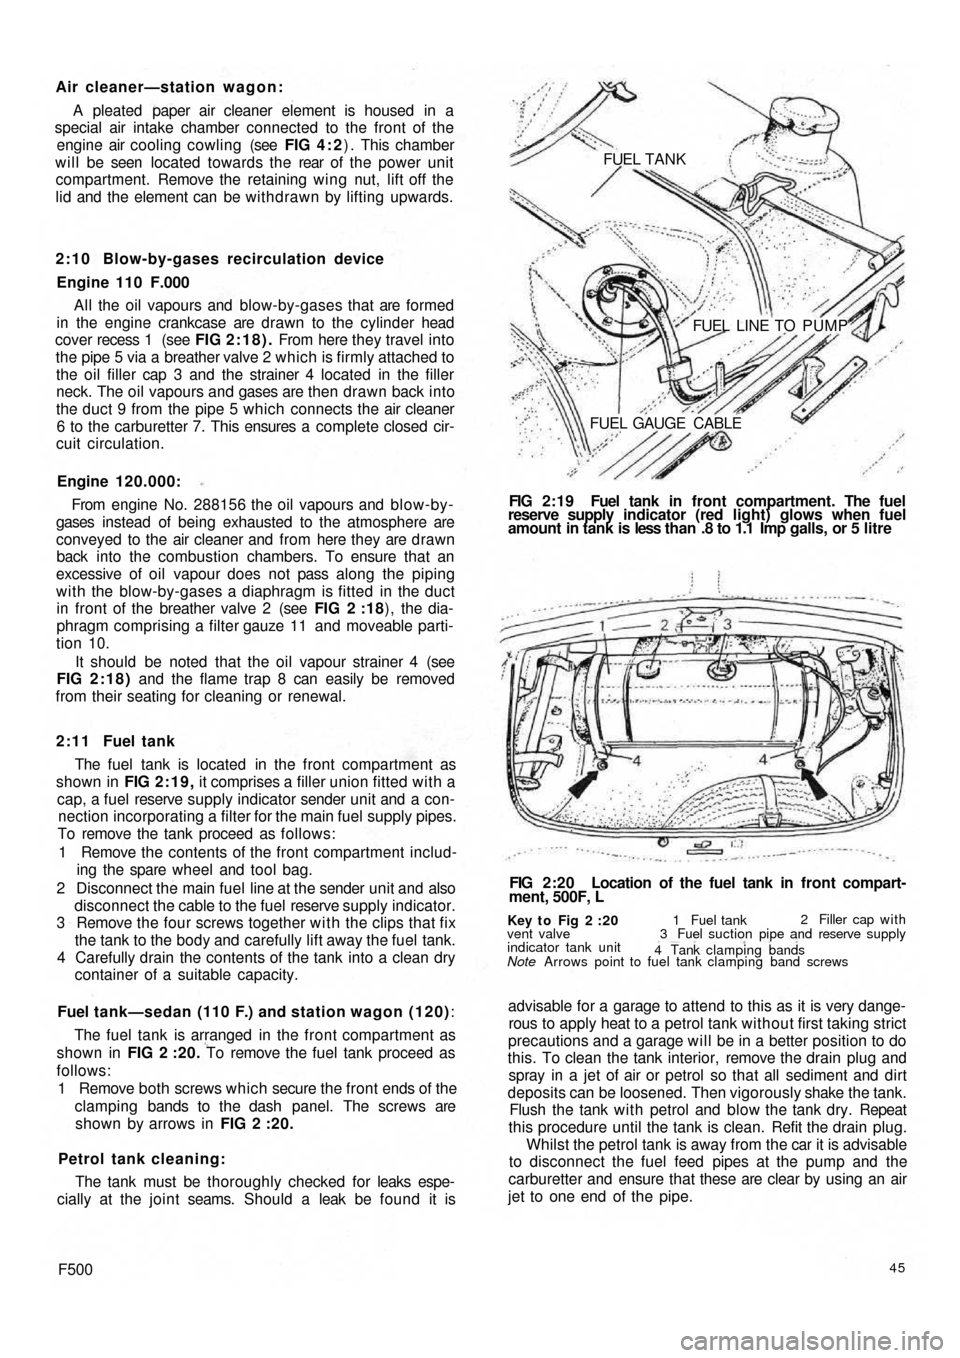 FIAT 500 1973 1.G Workshop Manual Air cleaner—station wagon:
A pleated paper air cleaner element is housed  in a
special air intake chamber connected to the front of the
engine air cooling cowling (see FIG 4 : 2) . This chamber
will